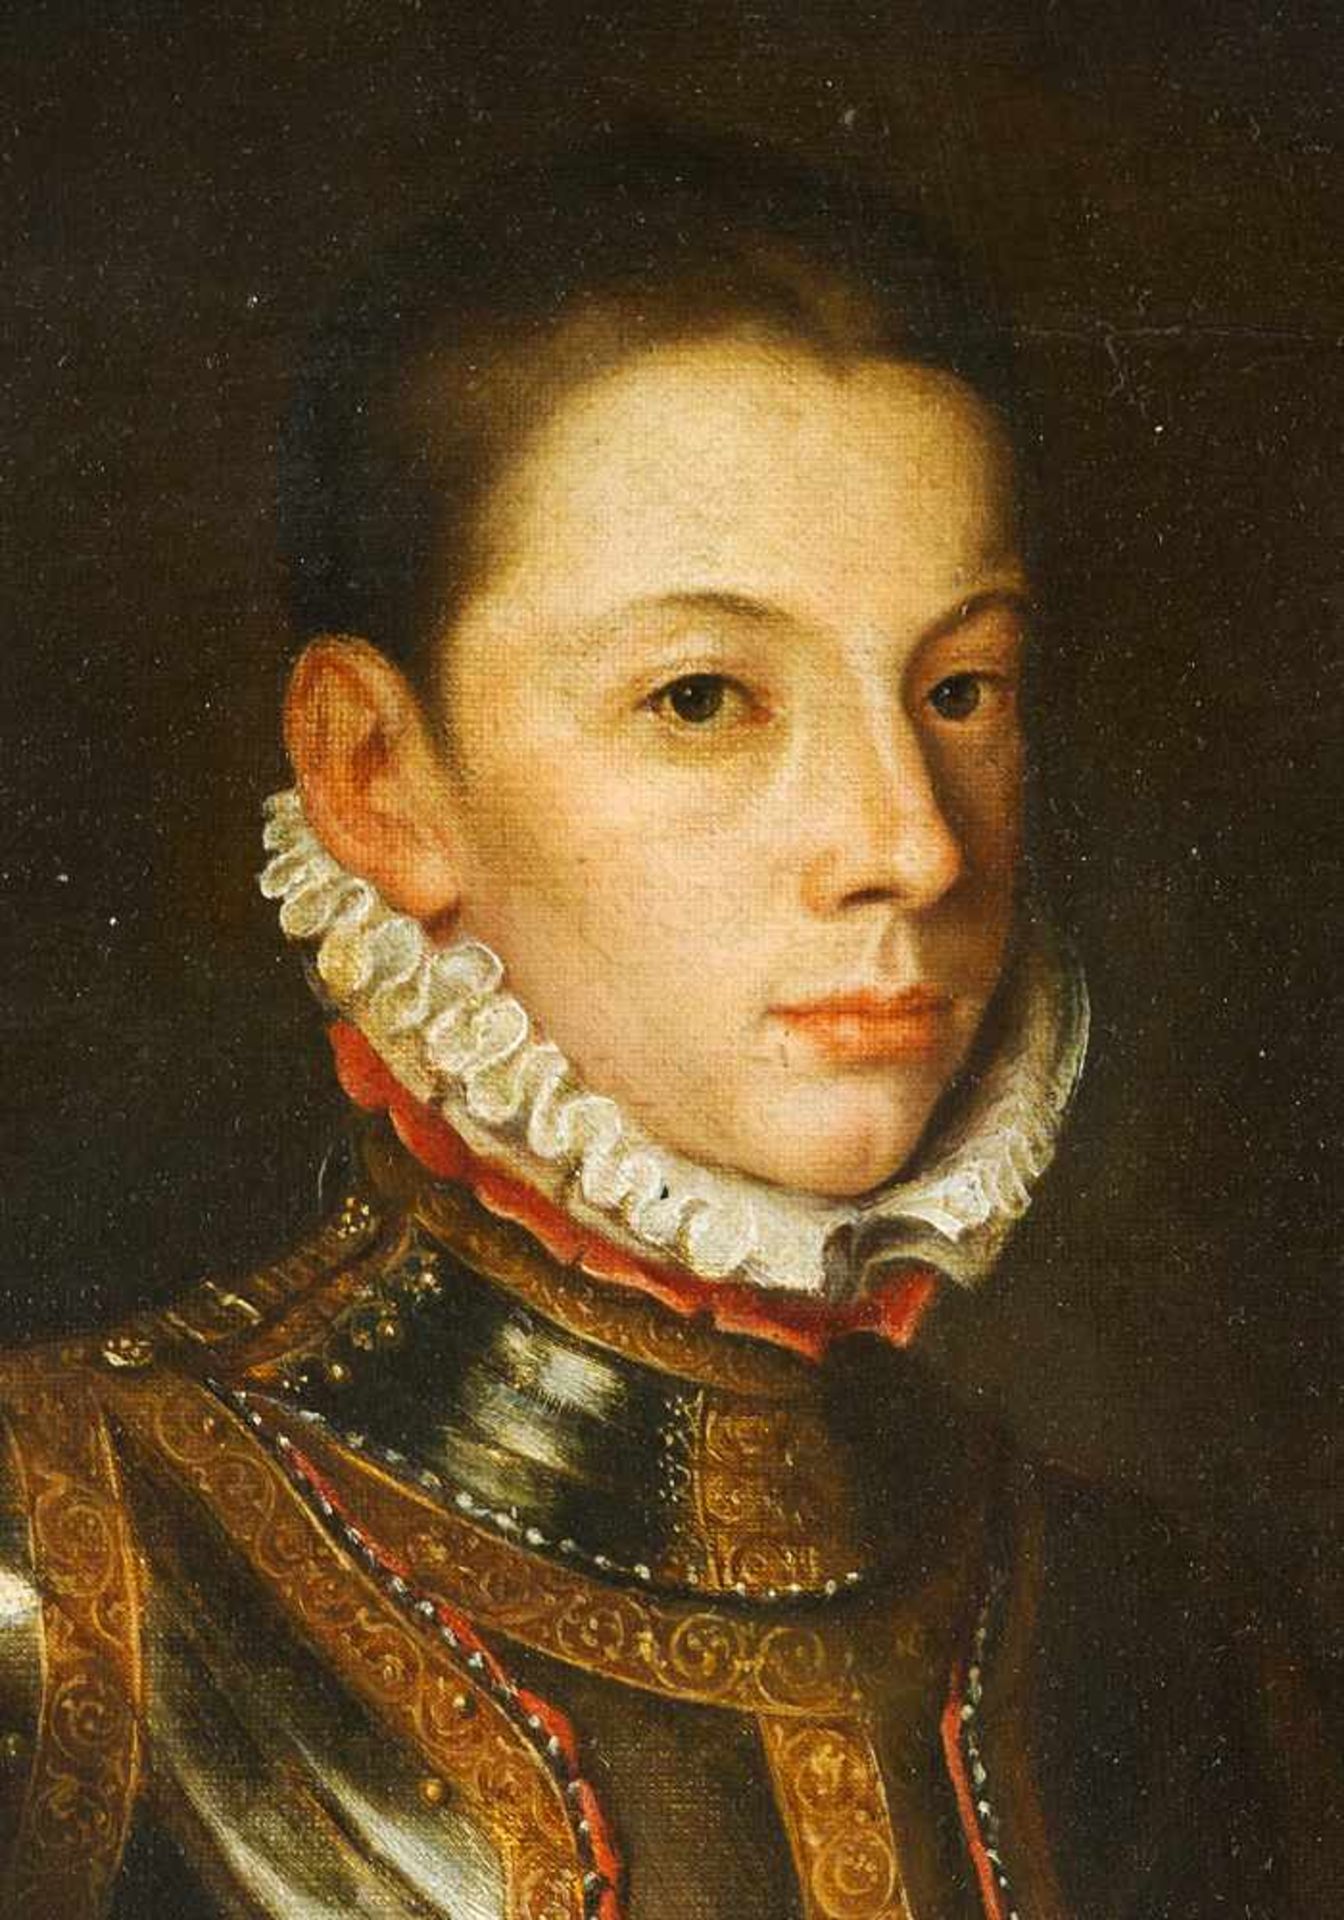 Alonso Sanchez Coello (1532-1588)-manner - Image 3 of 3